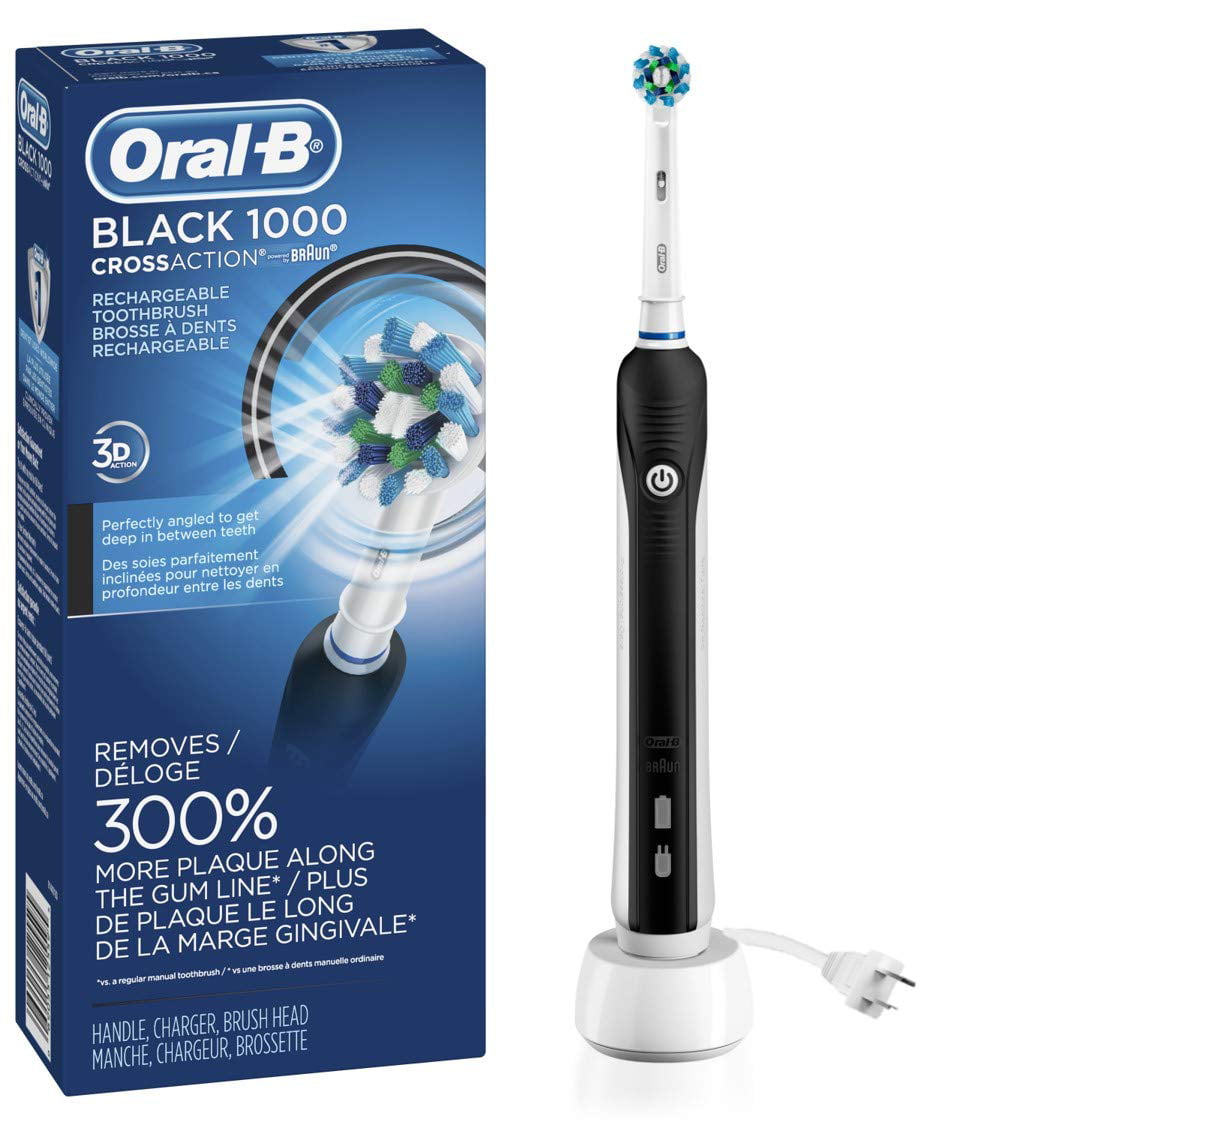 oral-b-black-1000-power-cross-action-rechargeable-electric-toothbrush